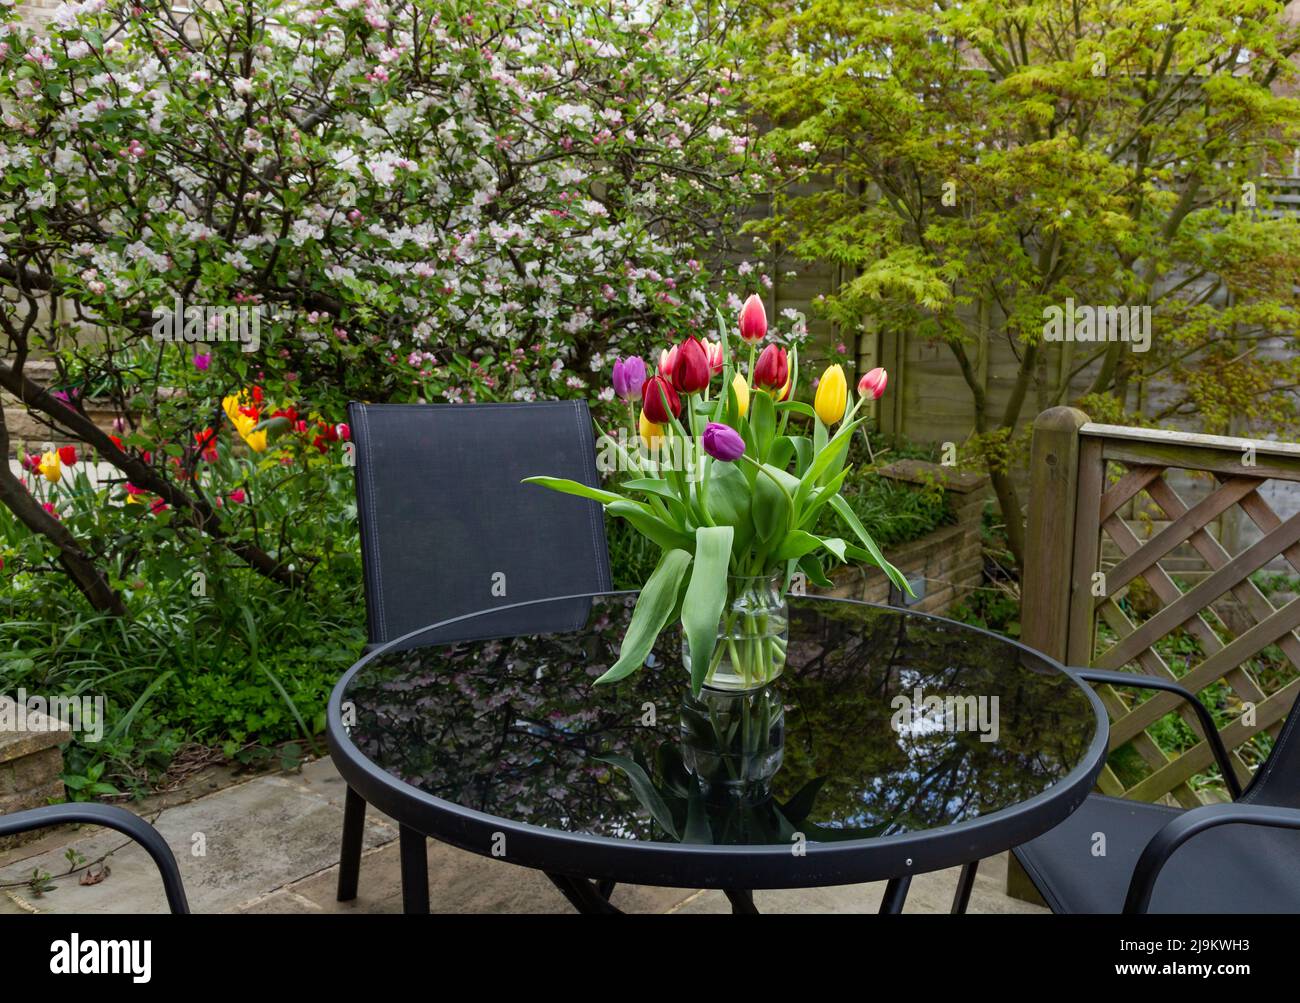 An English garden in spring. A vase of tulips is displayed on the glass garden table. Apple trees in blossom are in the background. Stock Photo